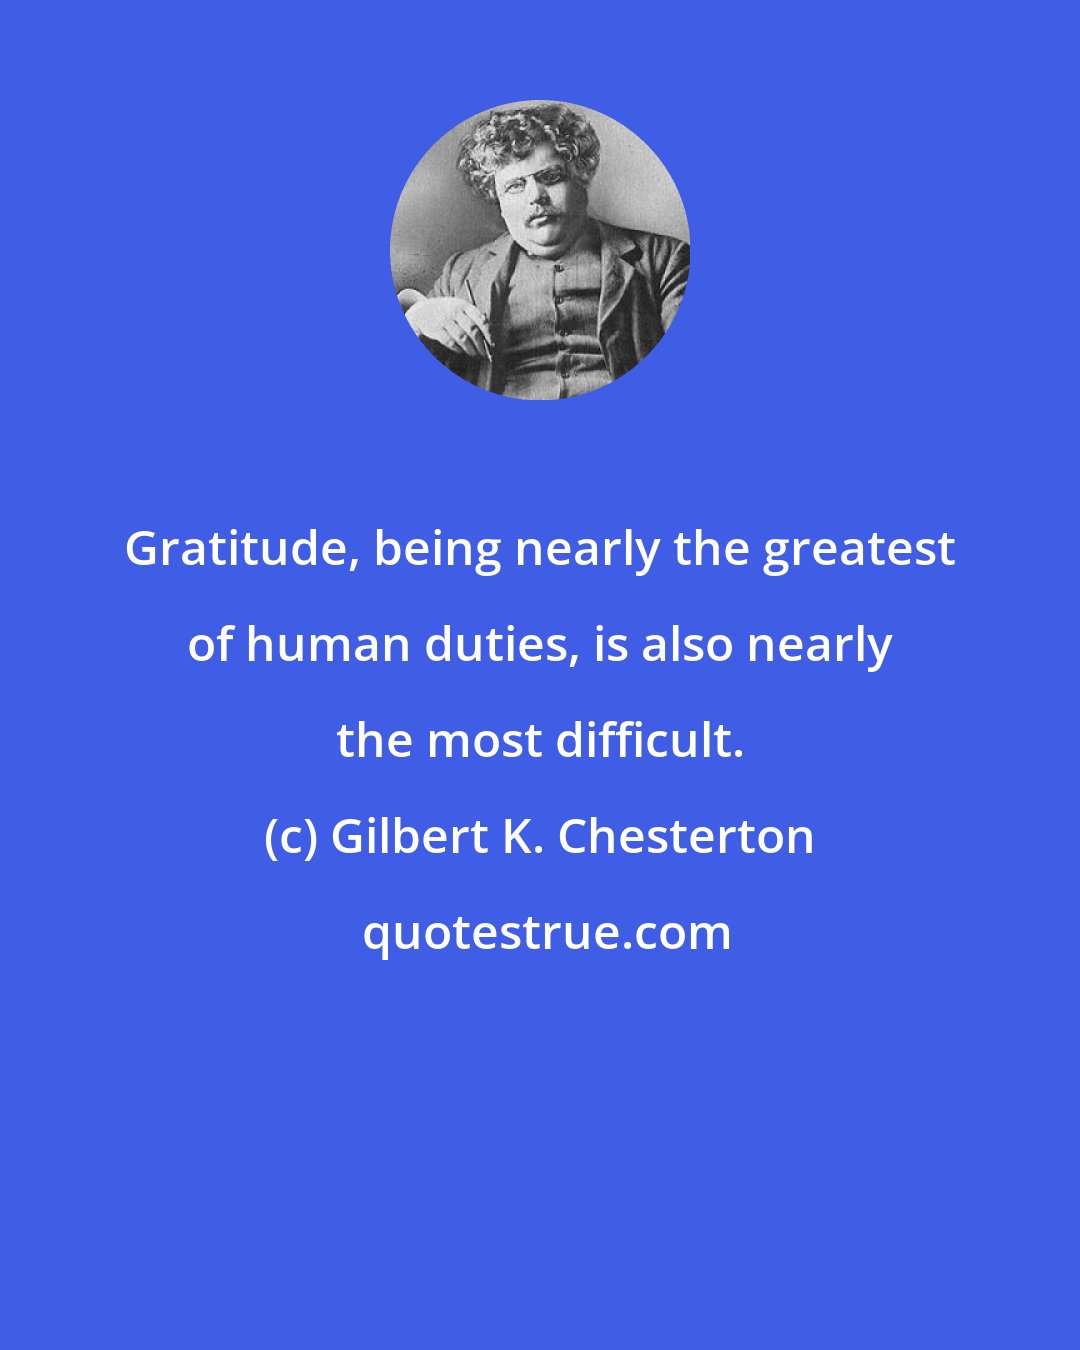 Gilbert K. Chesterton: Gratitude, being nearly the greatest of human duties, is also nearly the most difficult.